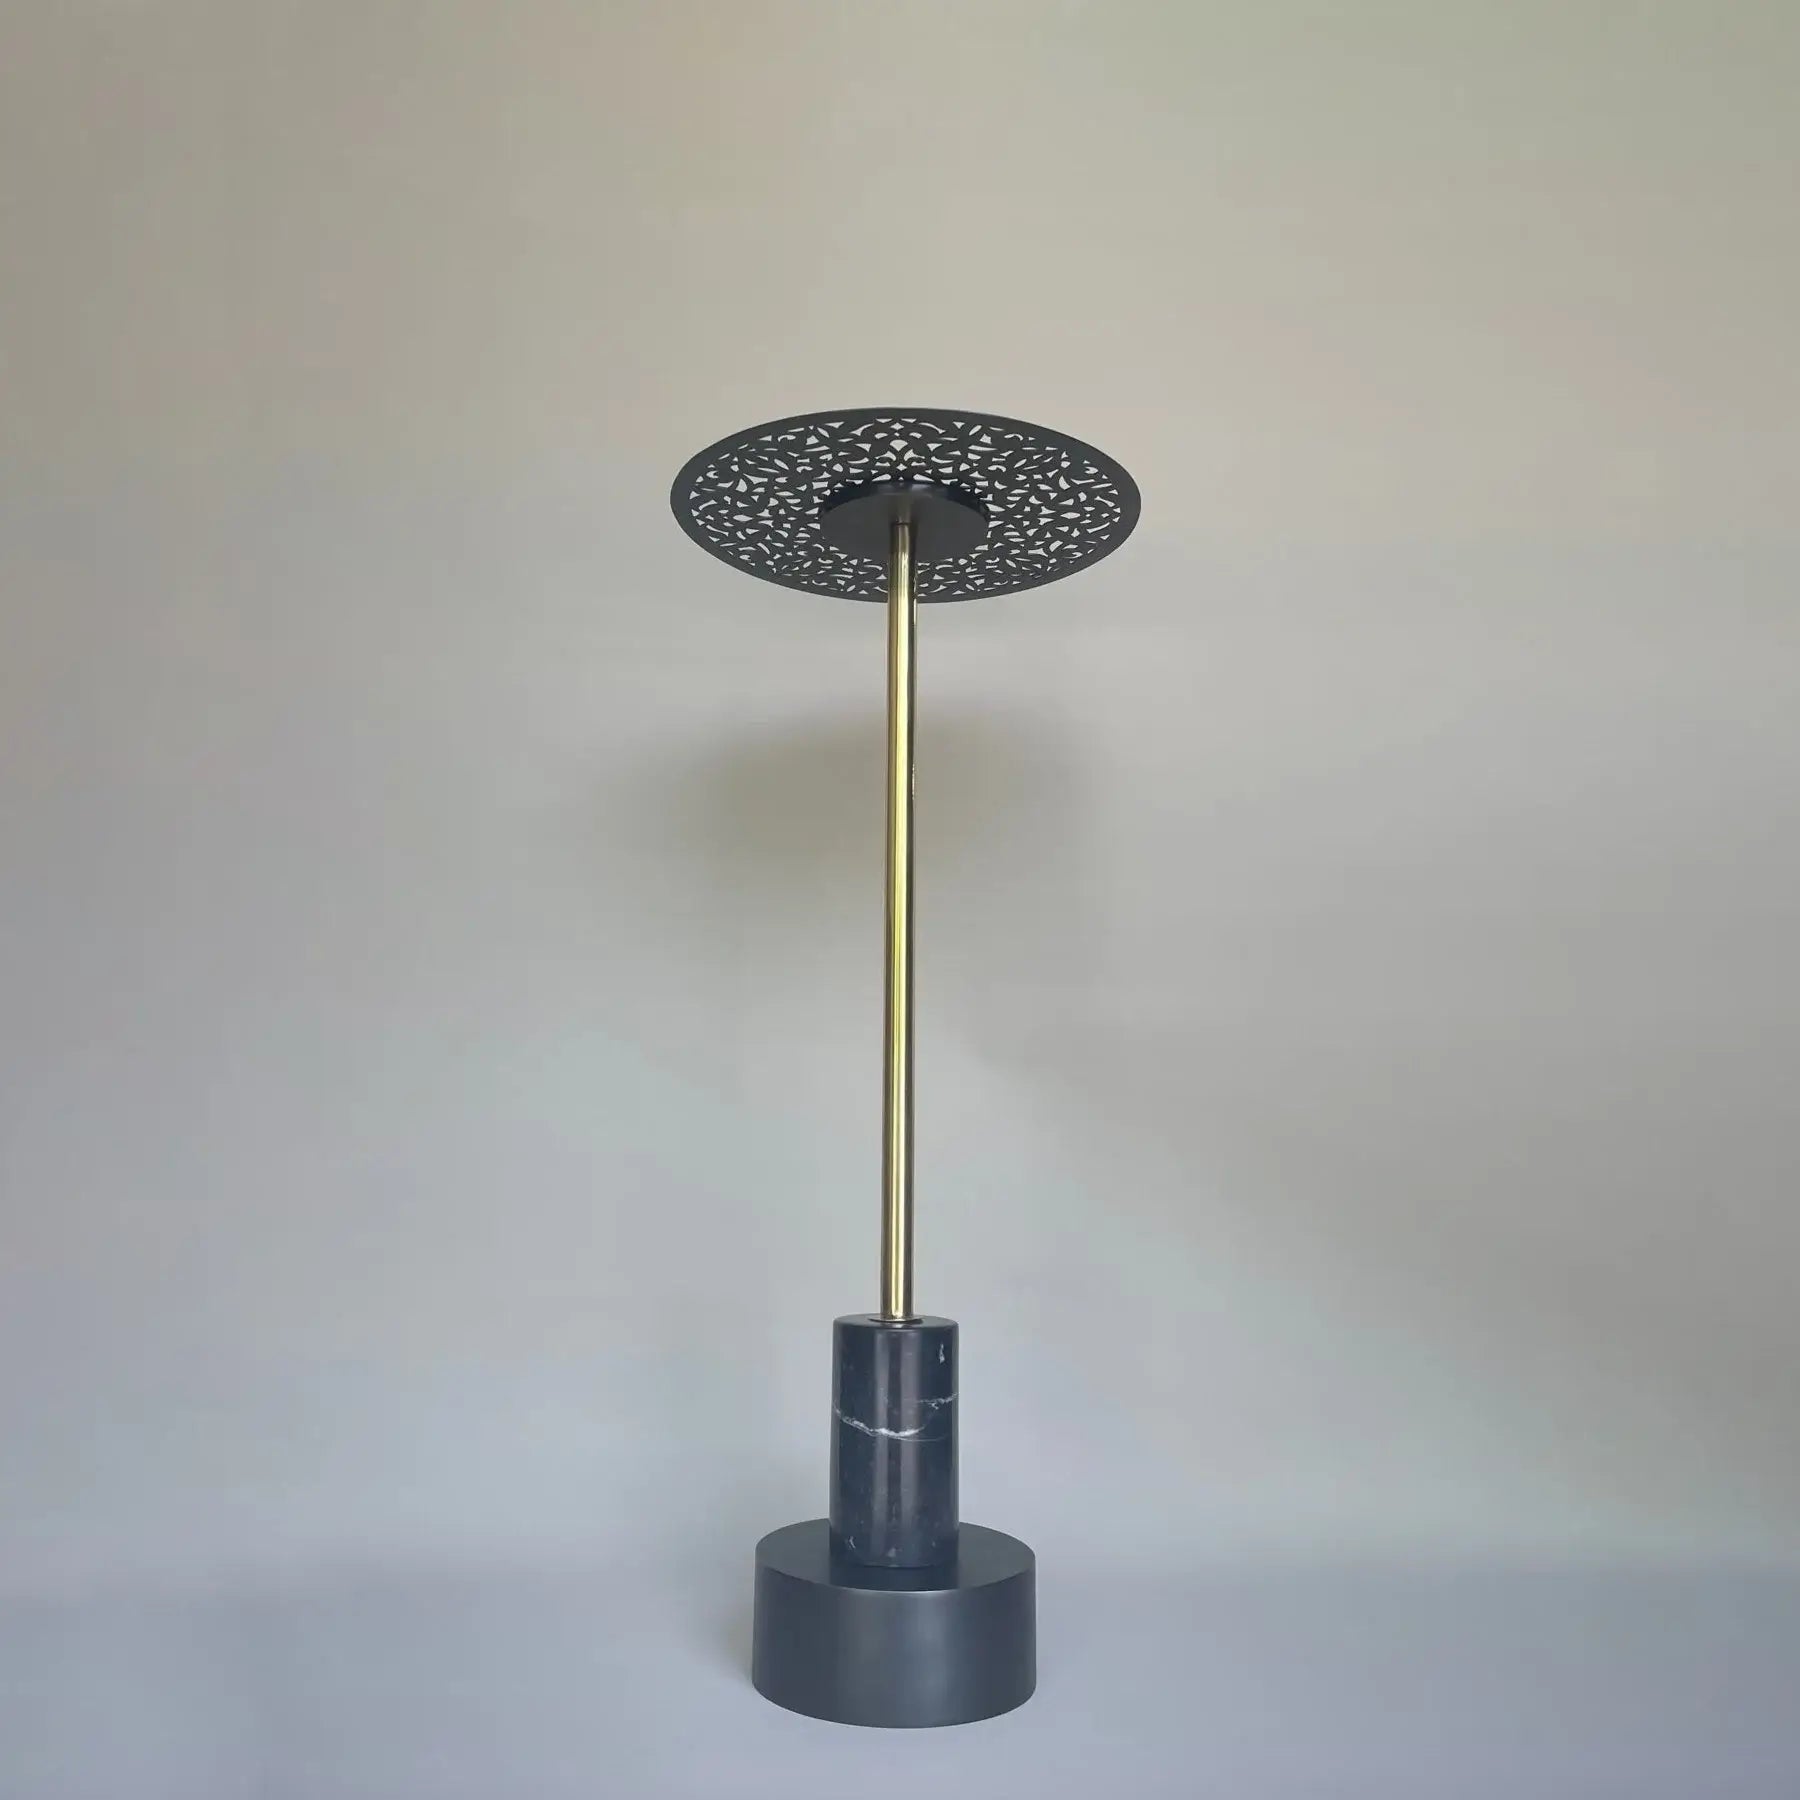 Dounia home Side table in  black  made of Brass and marble, Model: Riad